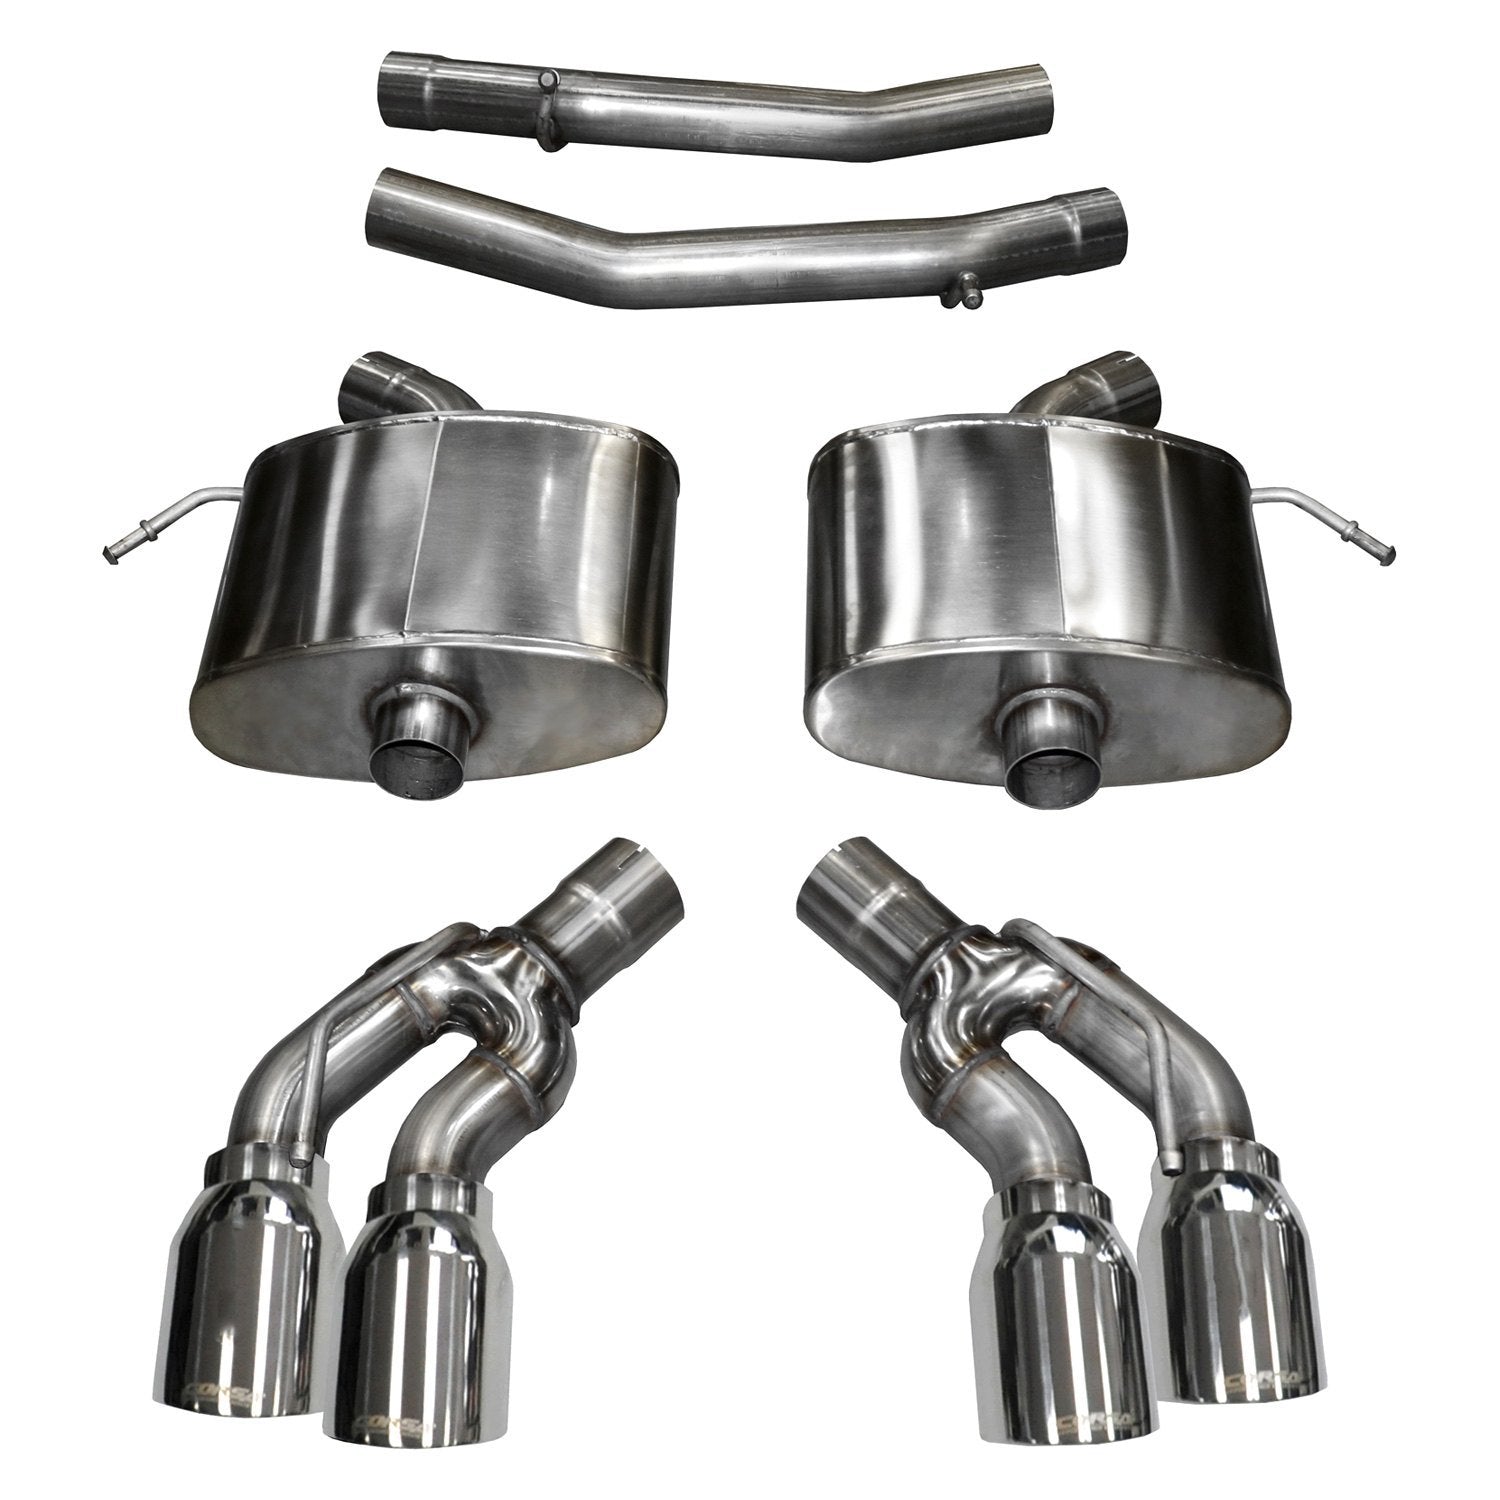 Corsa 304 SS Axle-Back Exhaust System Quad Rear For Cadillac CTS 16-19 14357